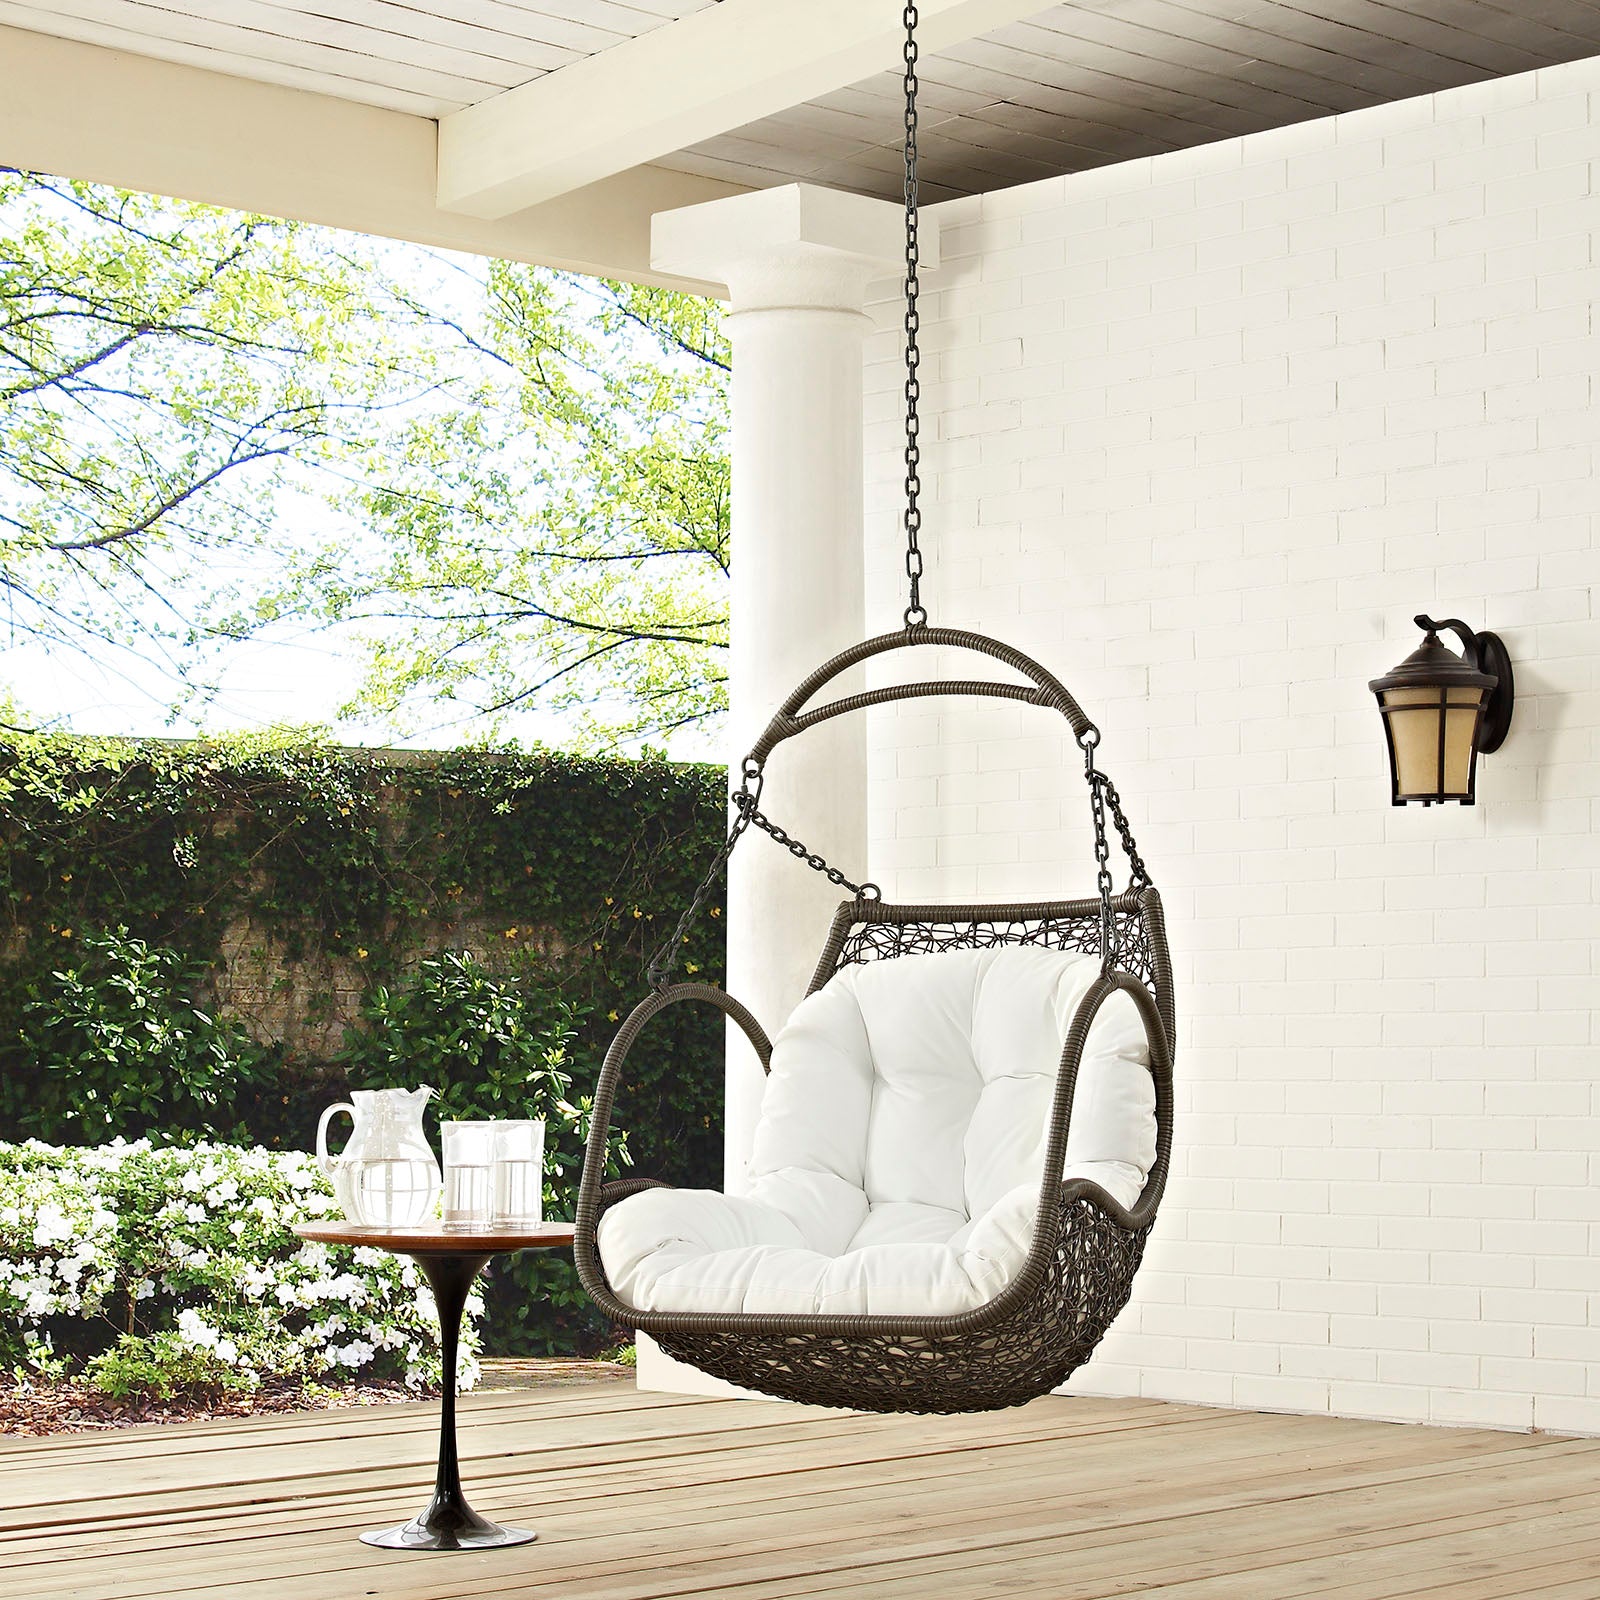 Arbor Outdoor Patio Swing Chair Without Stand - East Shore Modern Home Furnishings